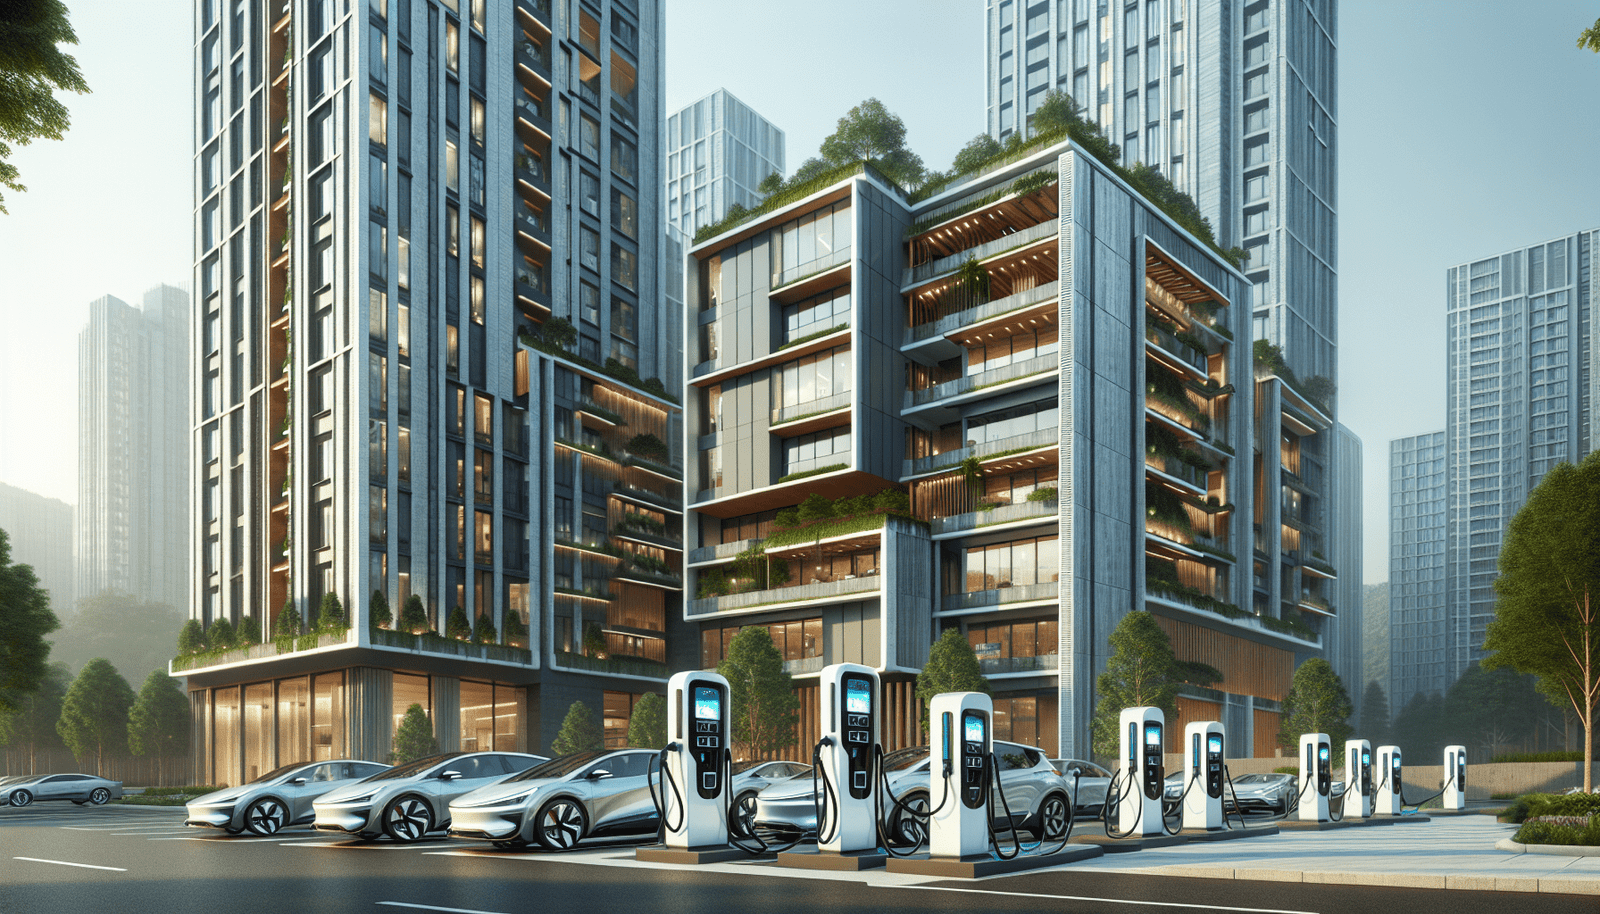 What Is The Outlook For Electric Vehicle Charging In Multi-unit Dwellings?